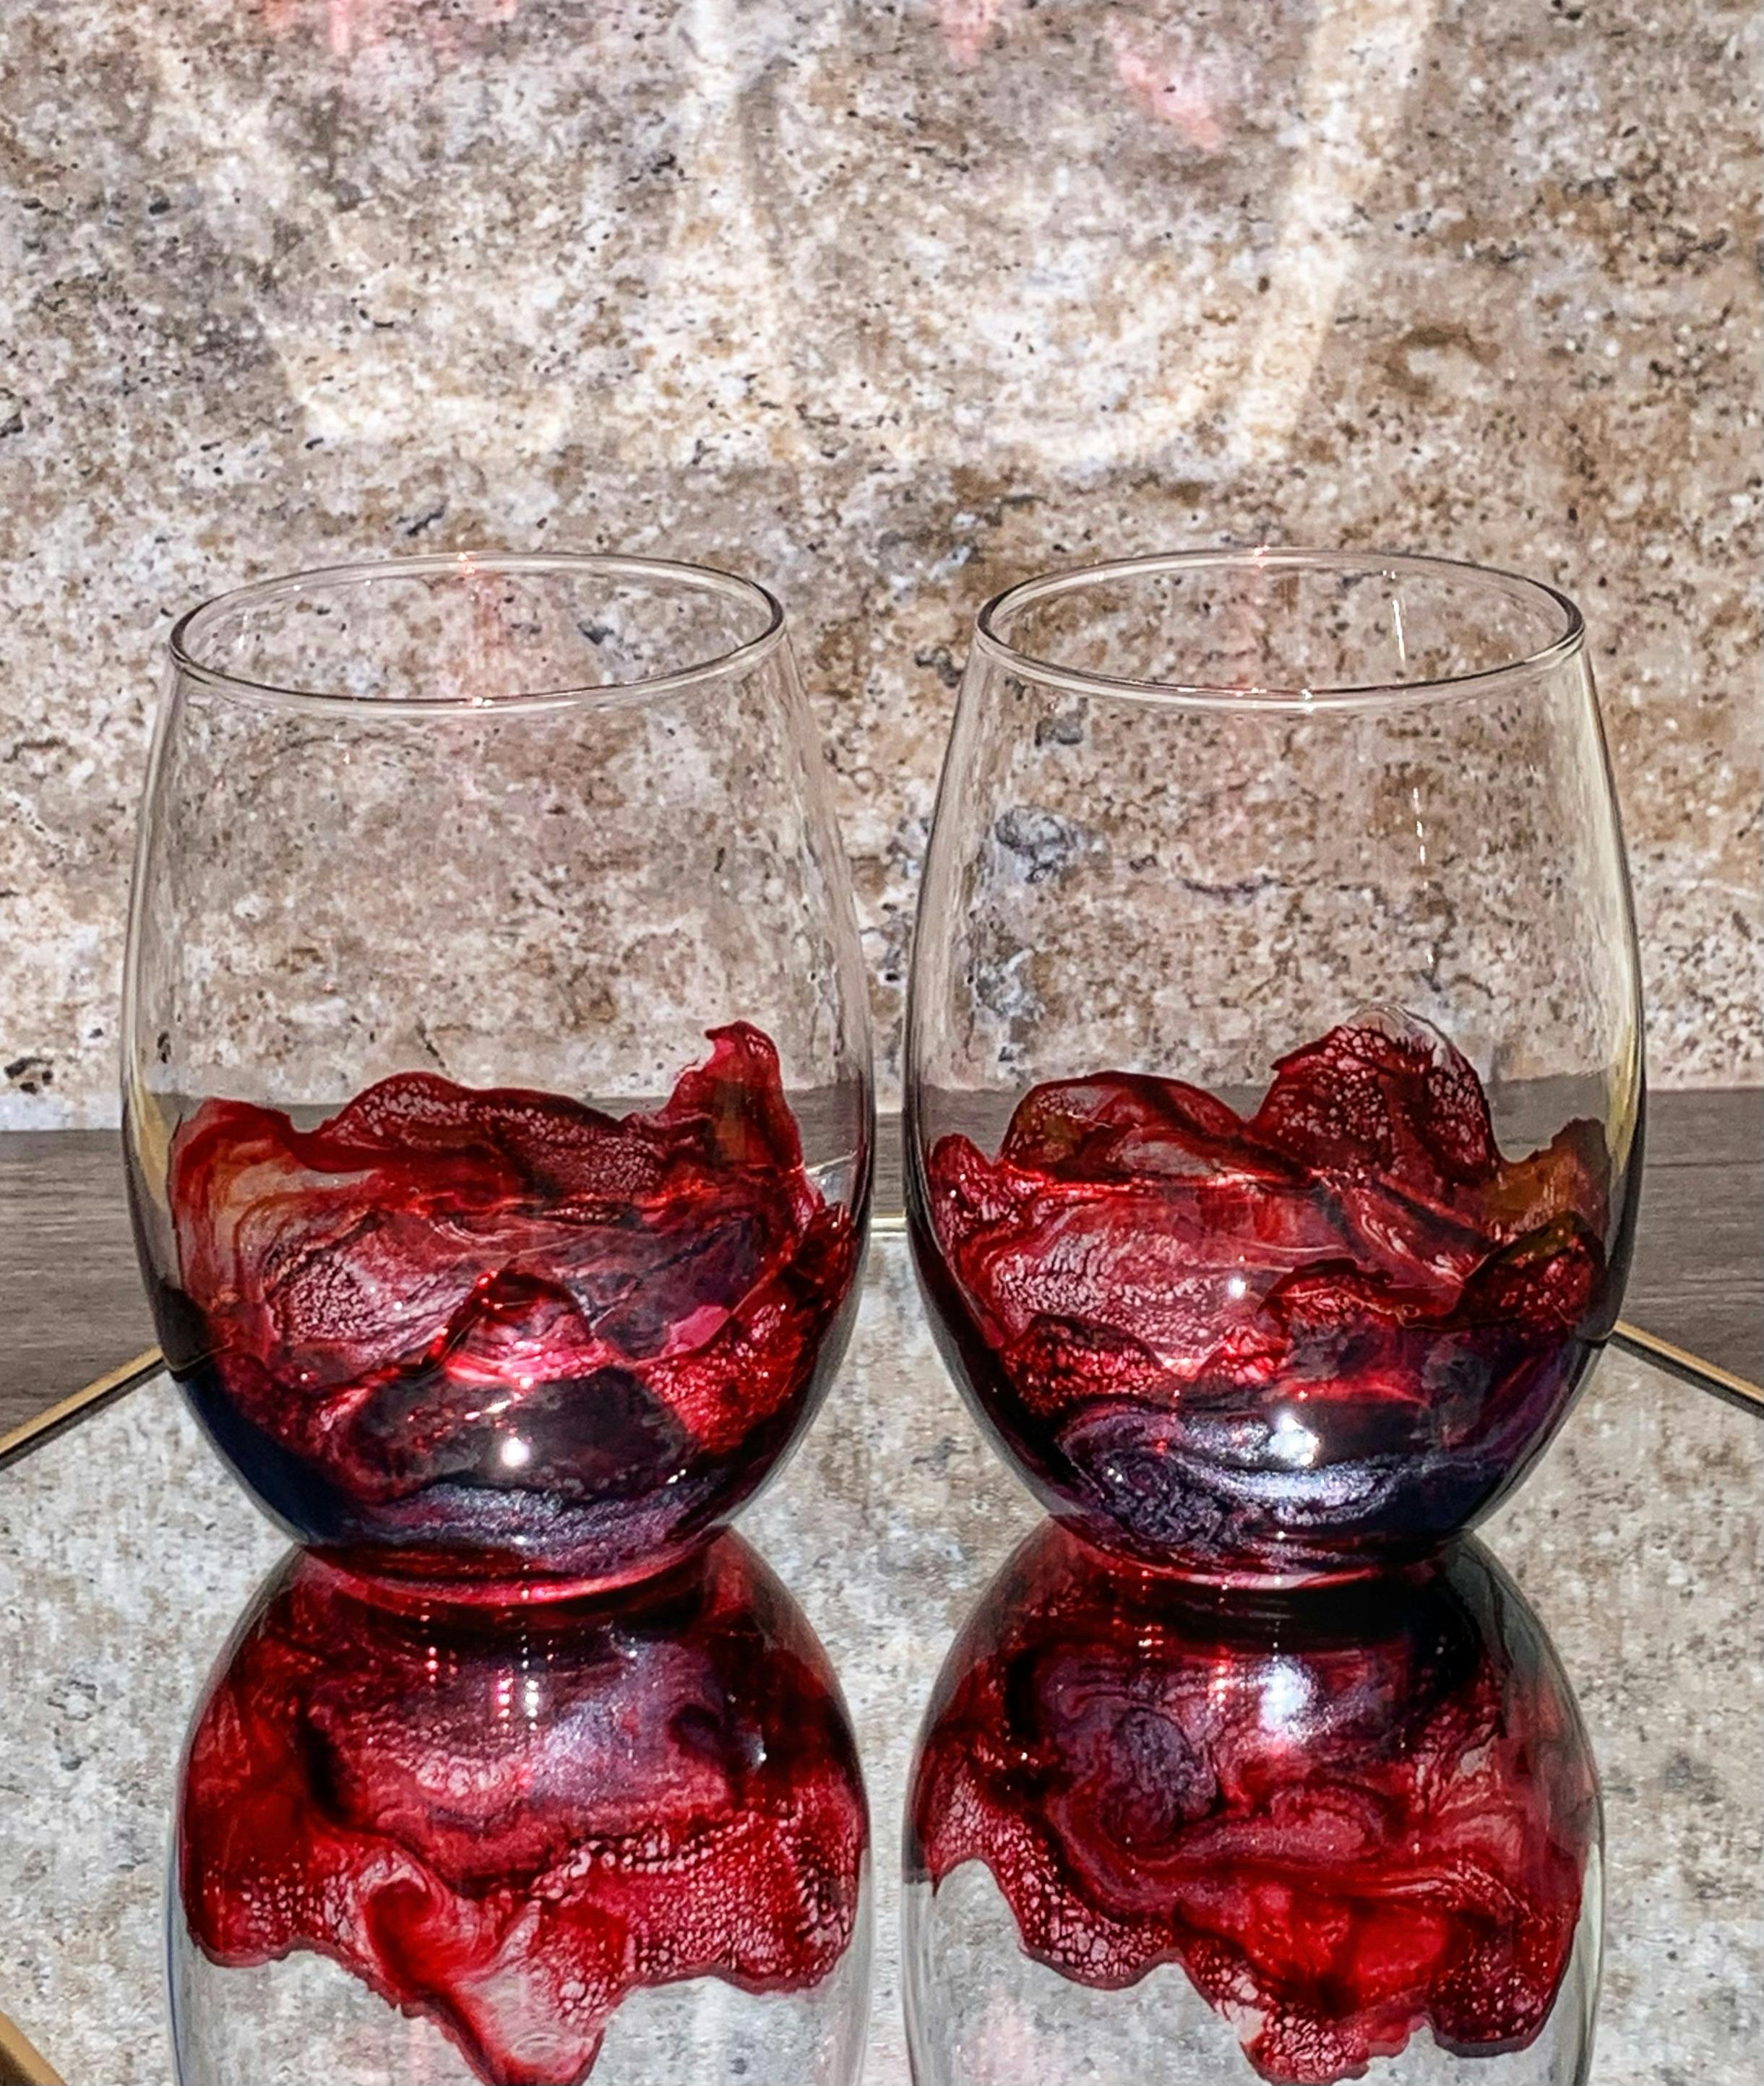 Wineglasses finished with resin in red